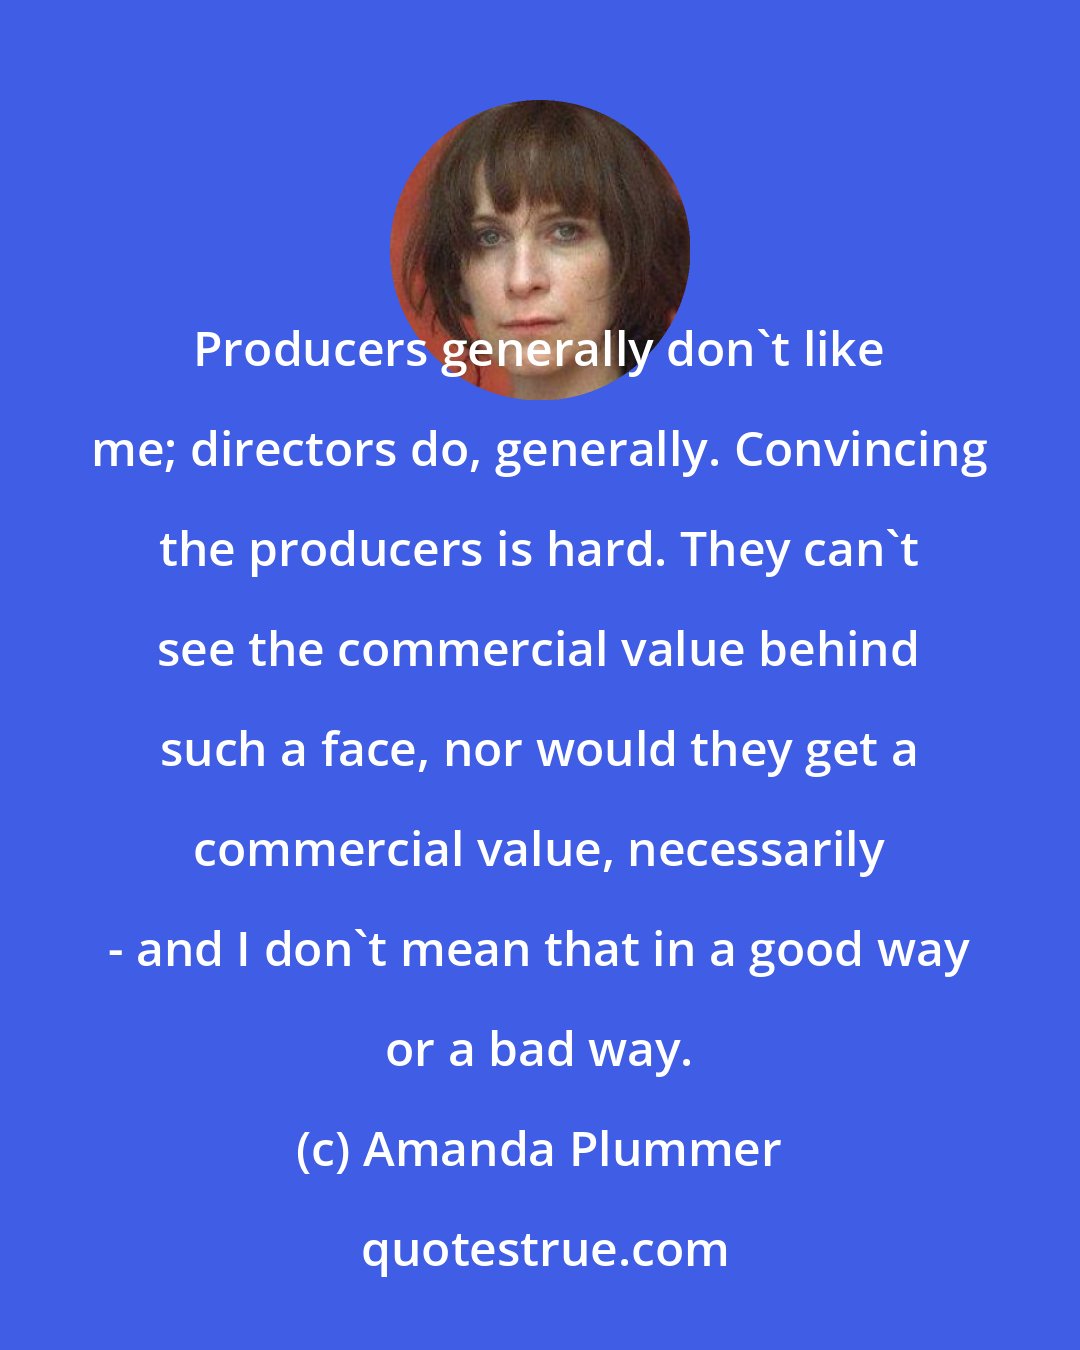 Amanda Plummer: Producers generally don't like me; directors do, generally. Convincing the producers is hard. They can't see the commercial value behind such a face, nor would they get a commercial value, necessarily - and I don't mean that in a good way or a bad way.